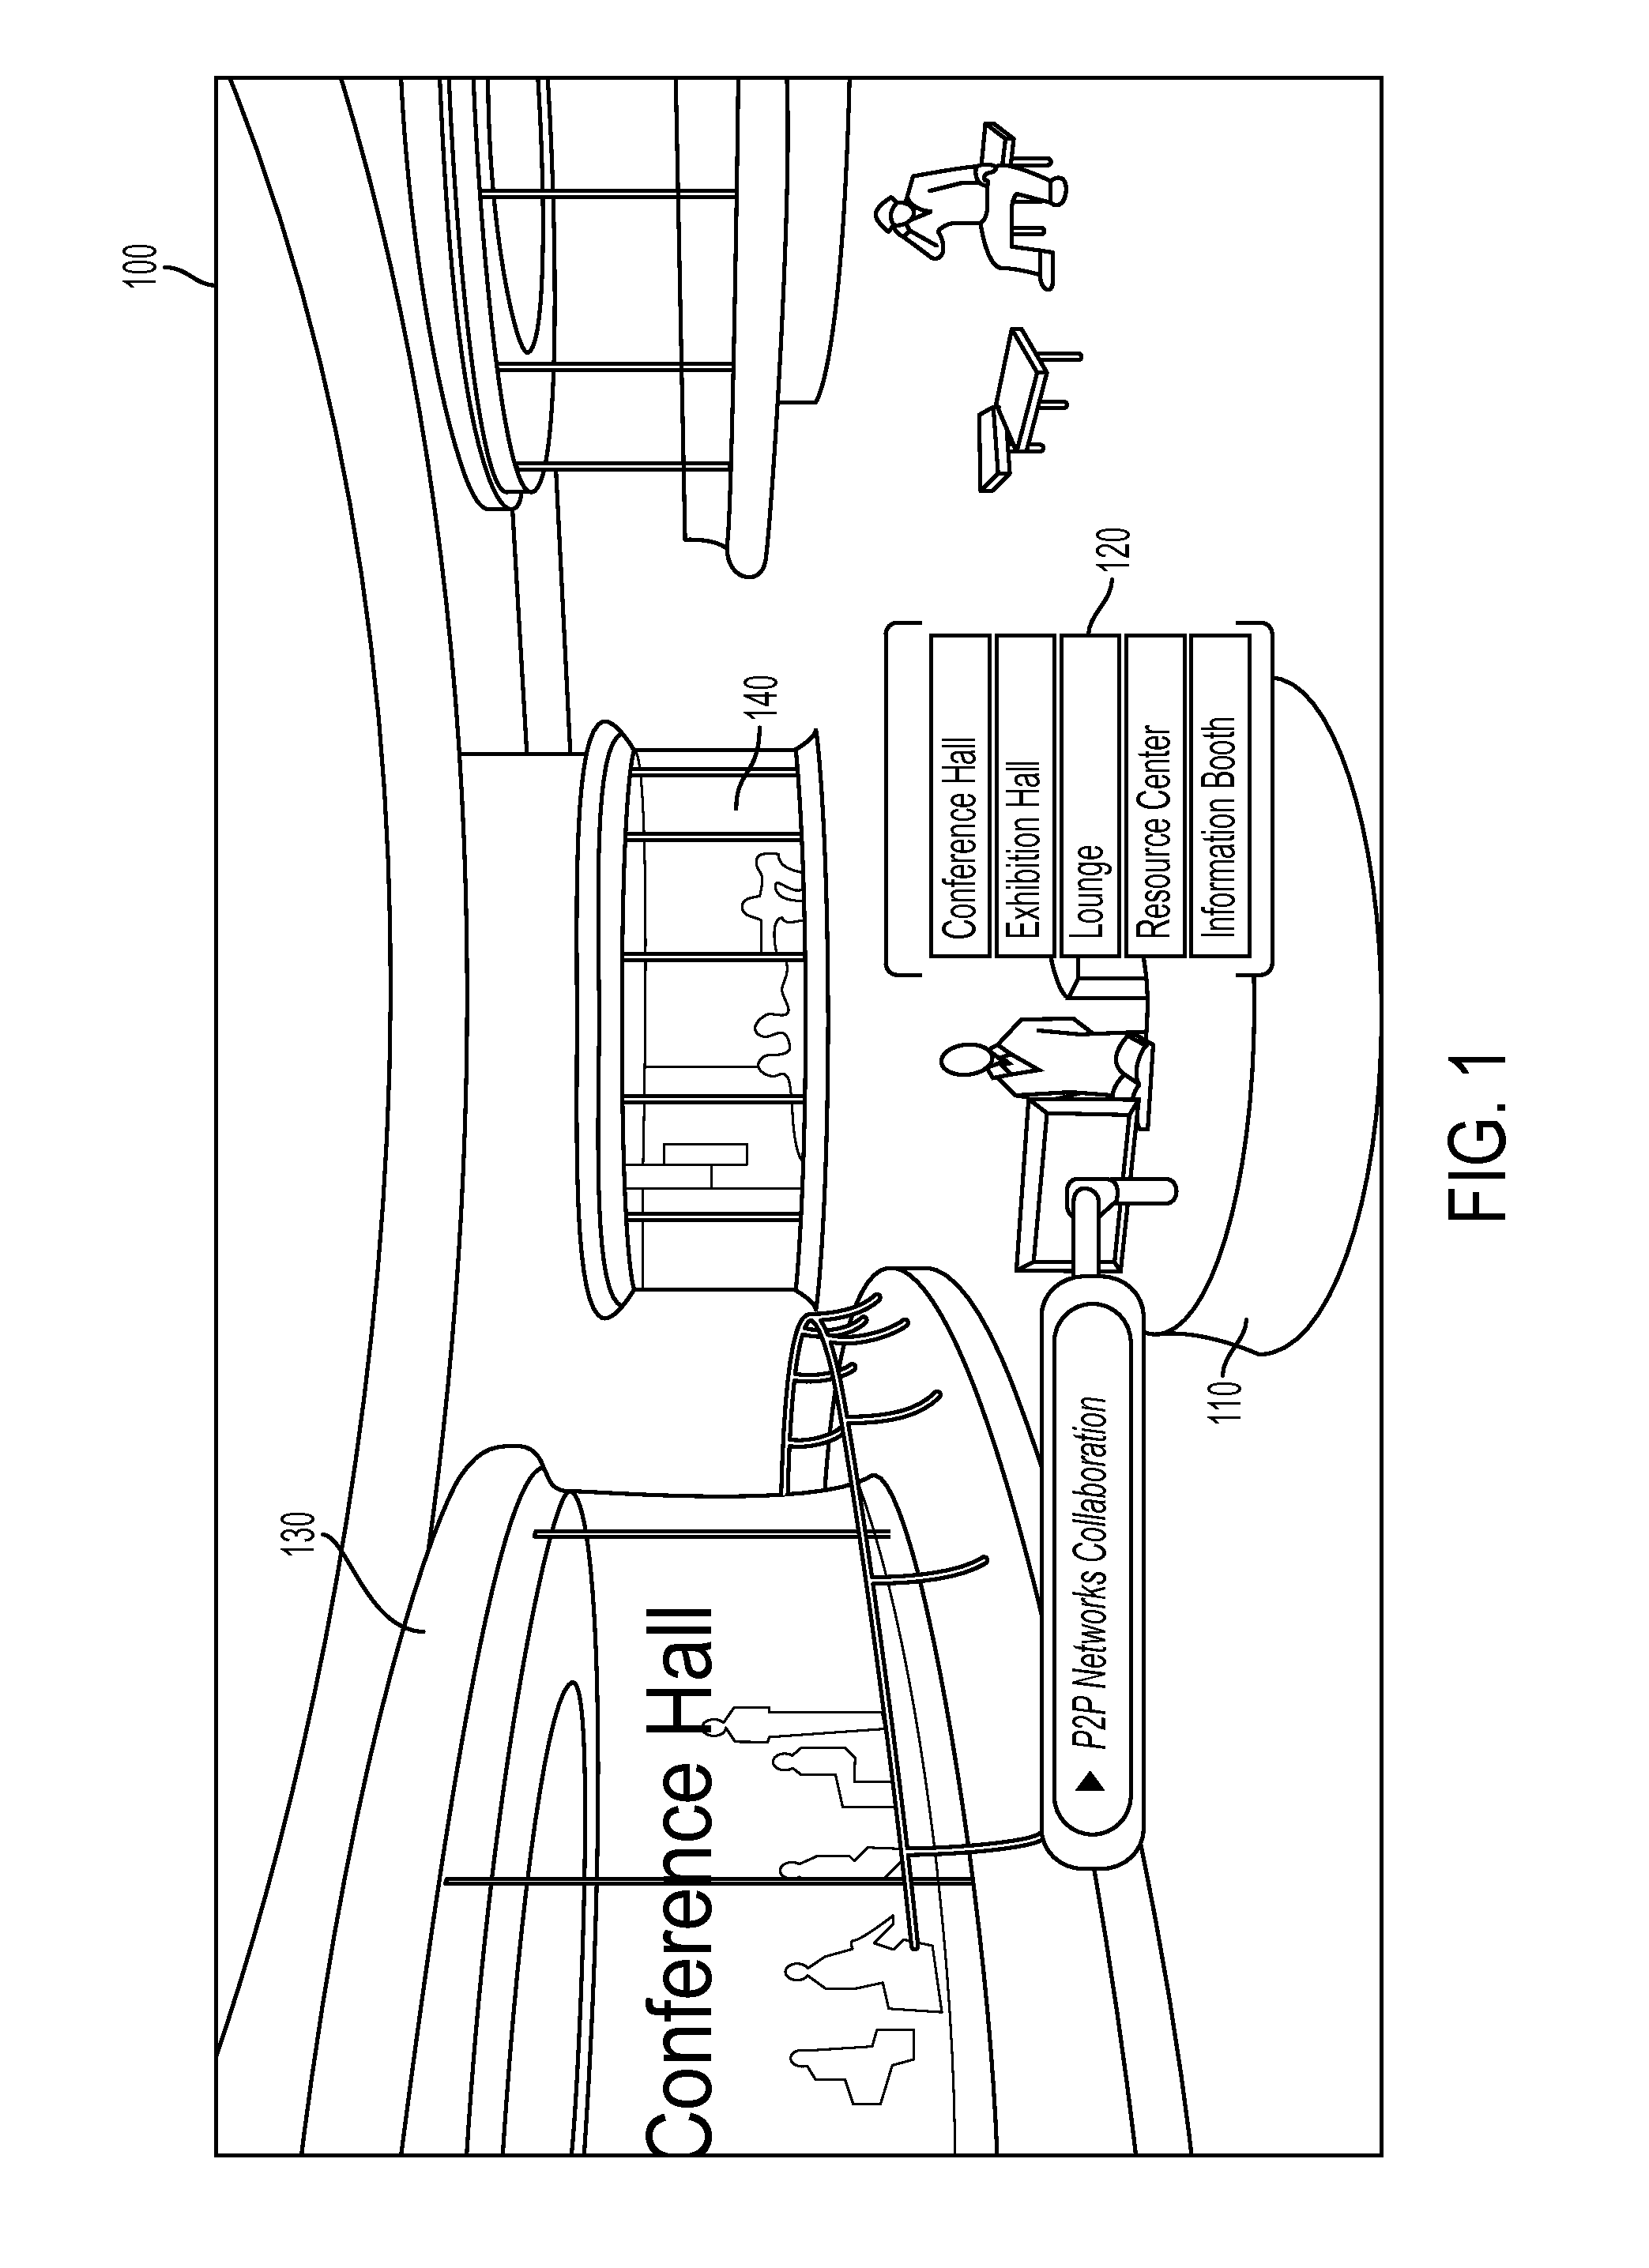 Apparatus and method for a virtual environment center and venues thereof